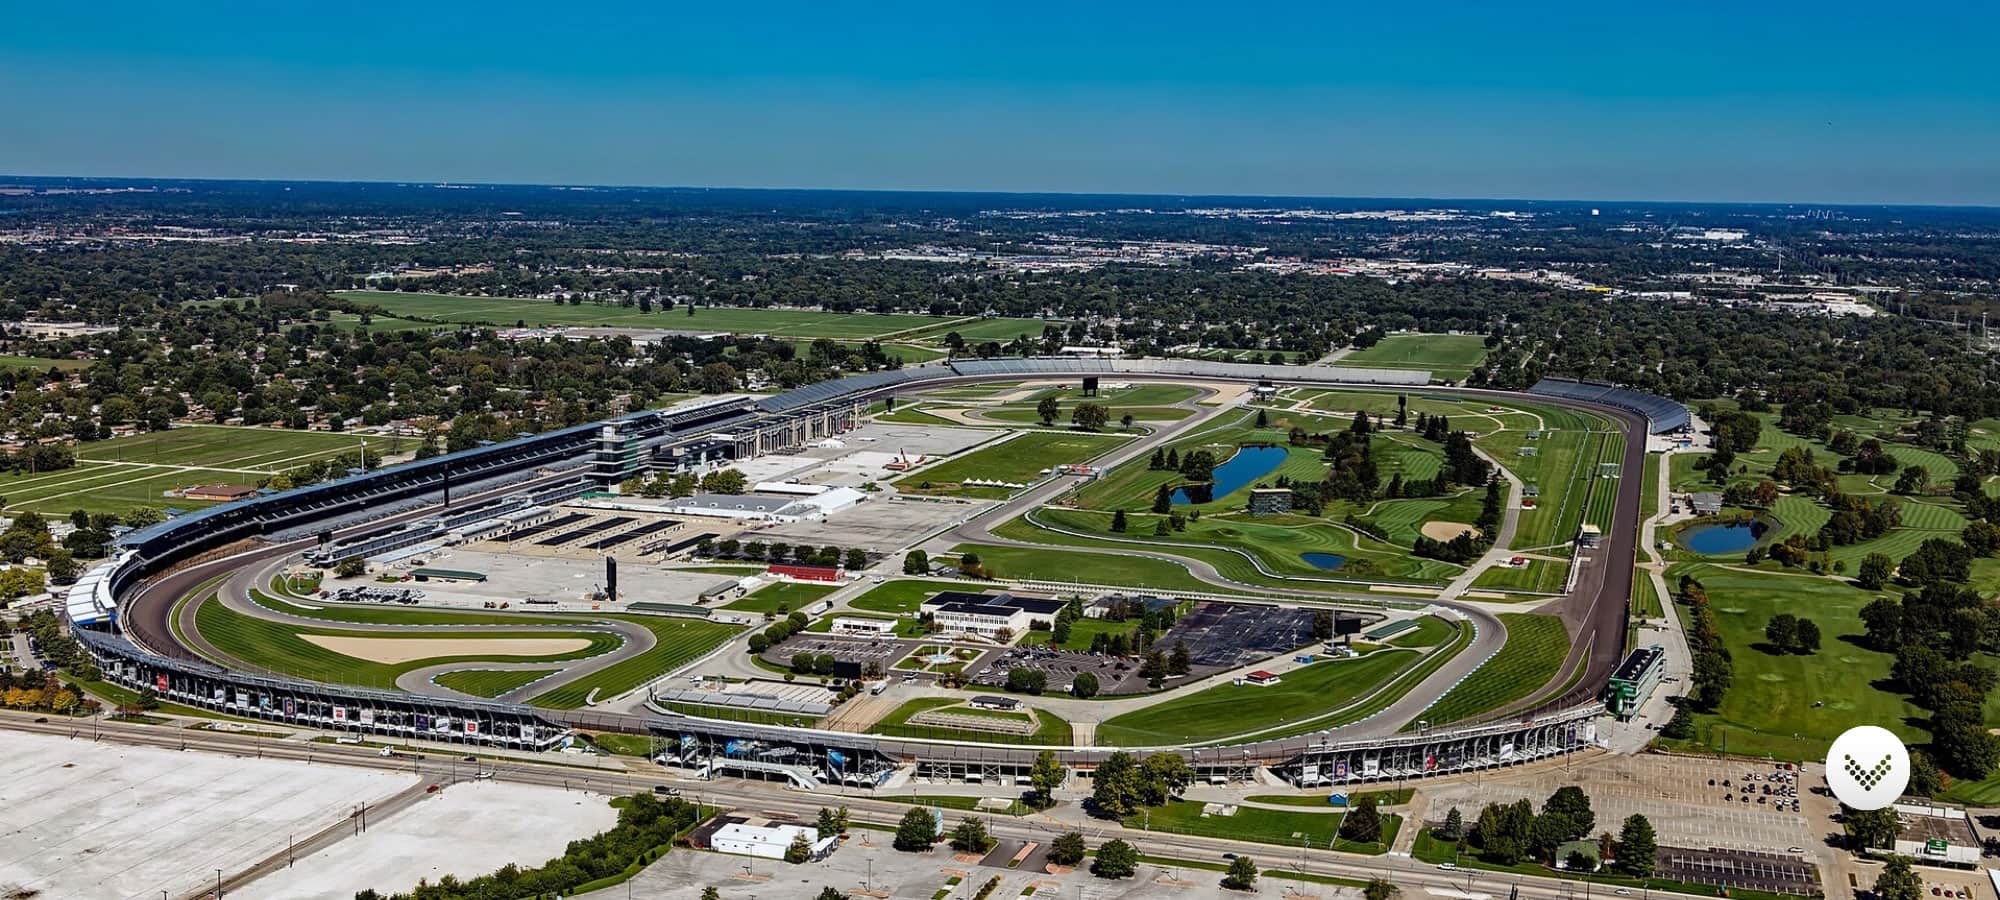 Arial view of the Indianapolis Motor Speedway on a sunny day